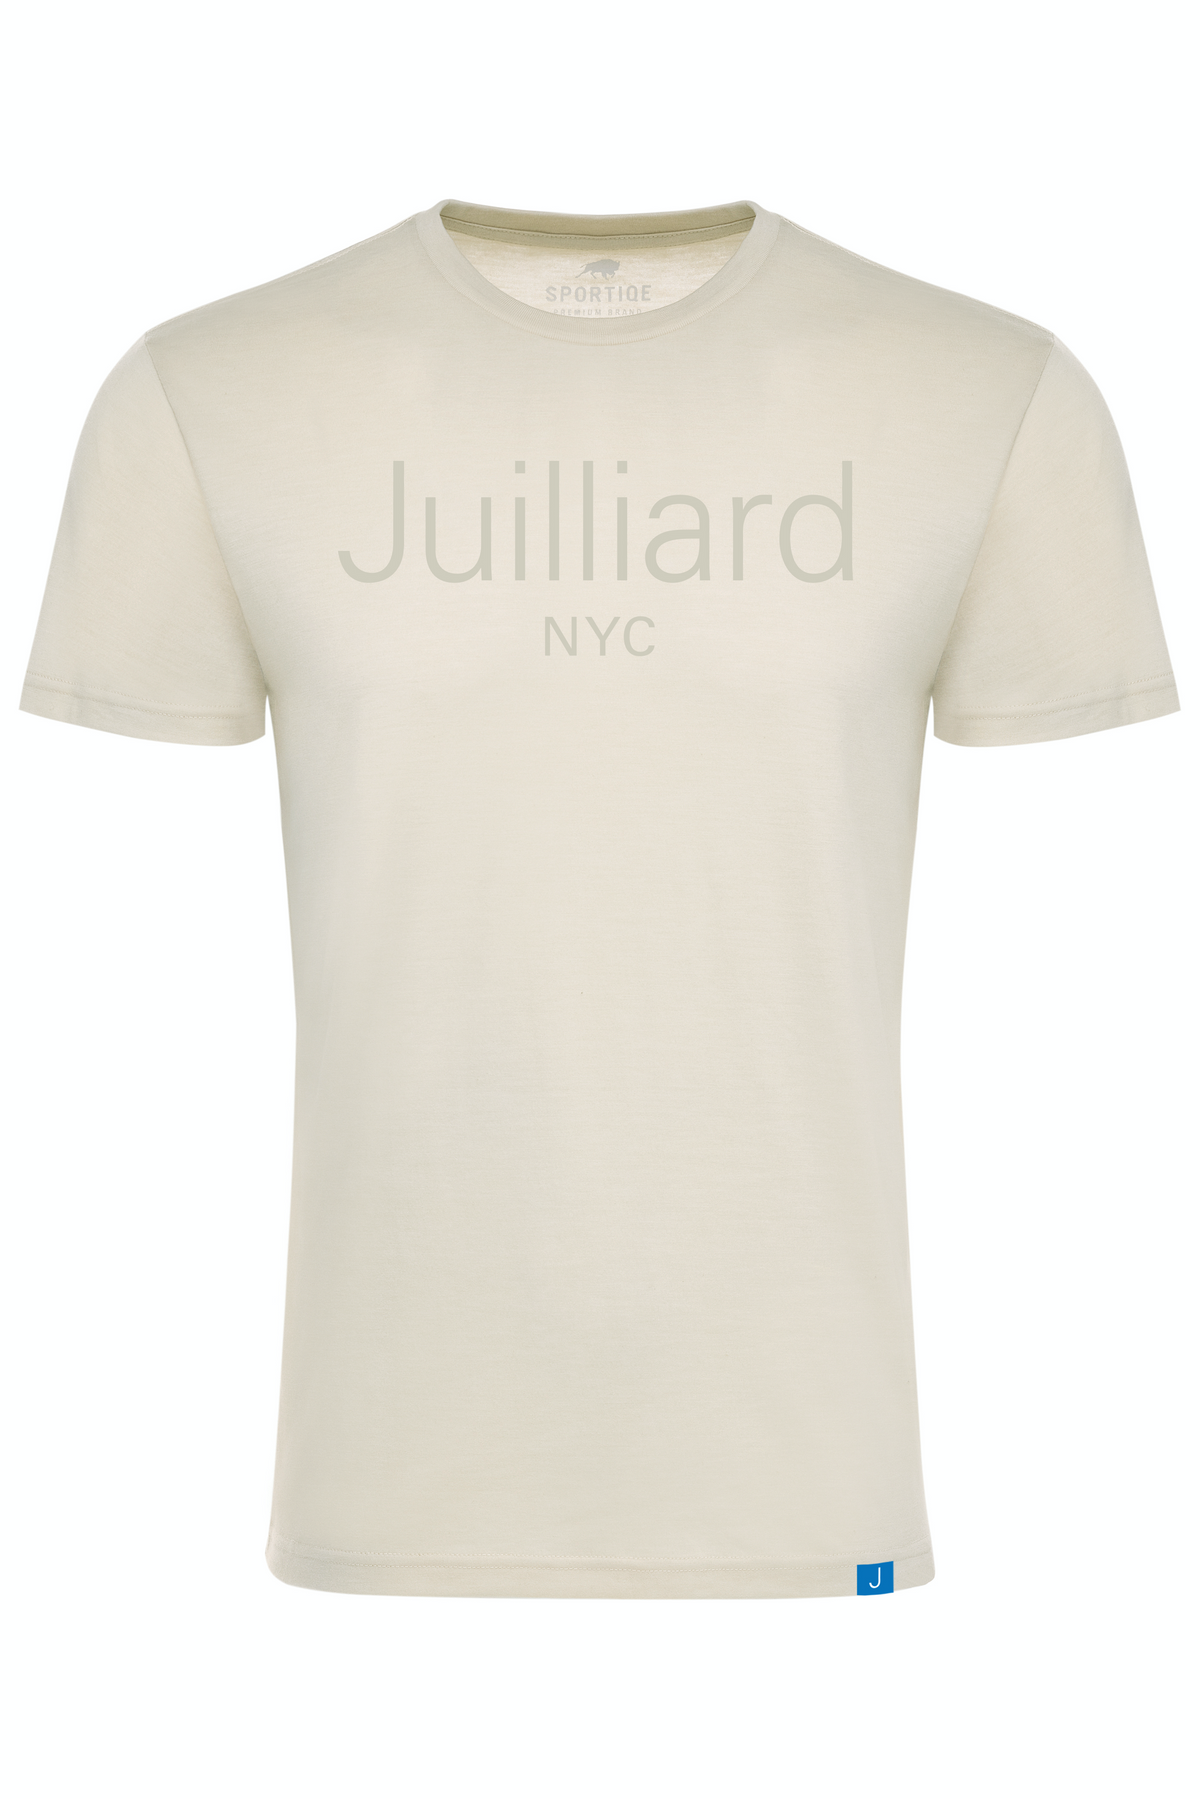 T-shirt: Juilliard NYC Bone with Ghost Ink FINAL SALE / CLEARANCE